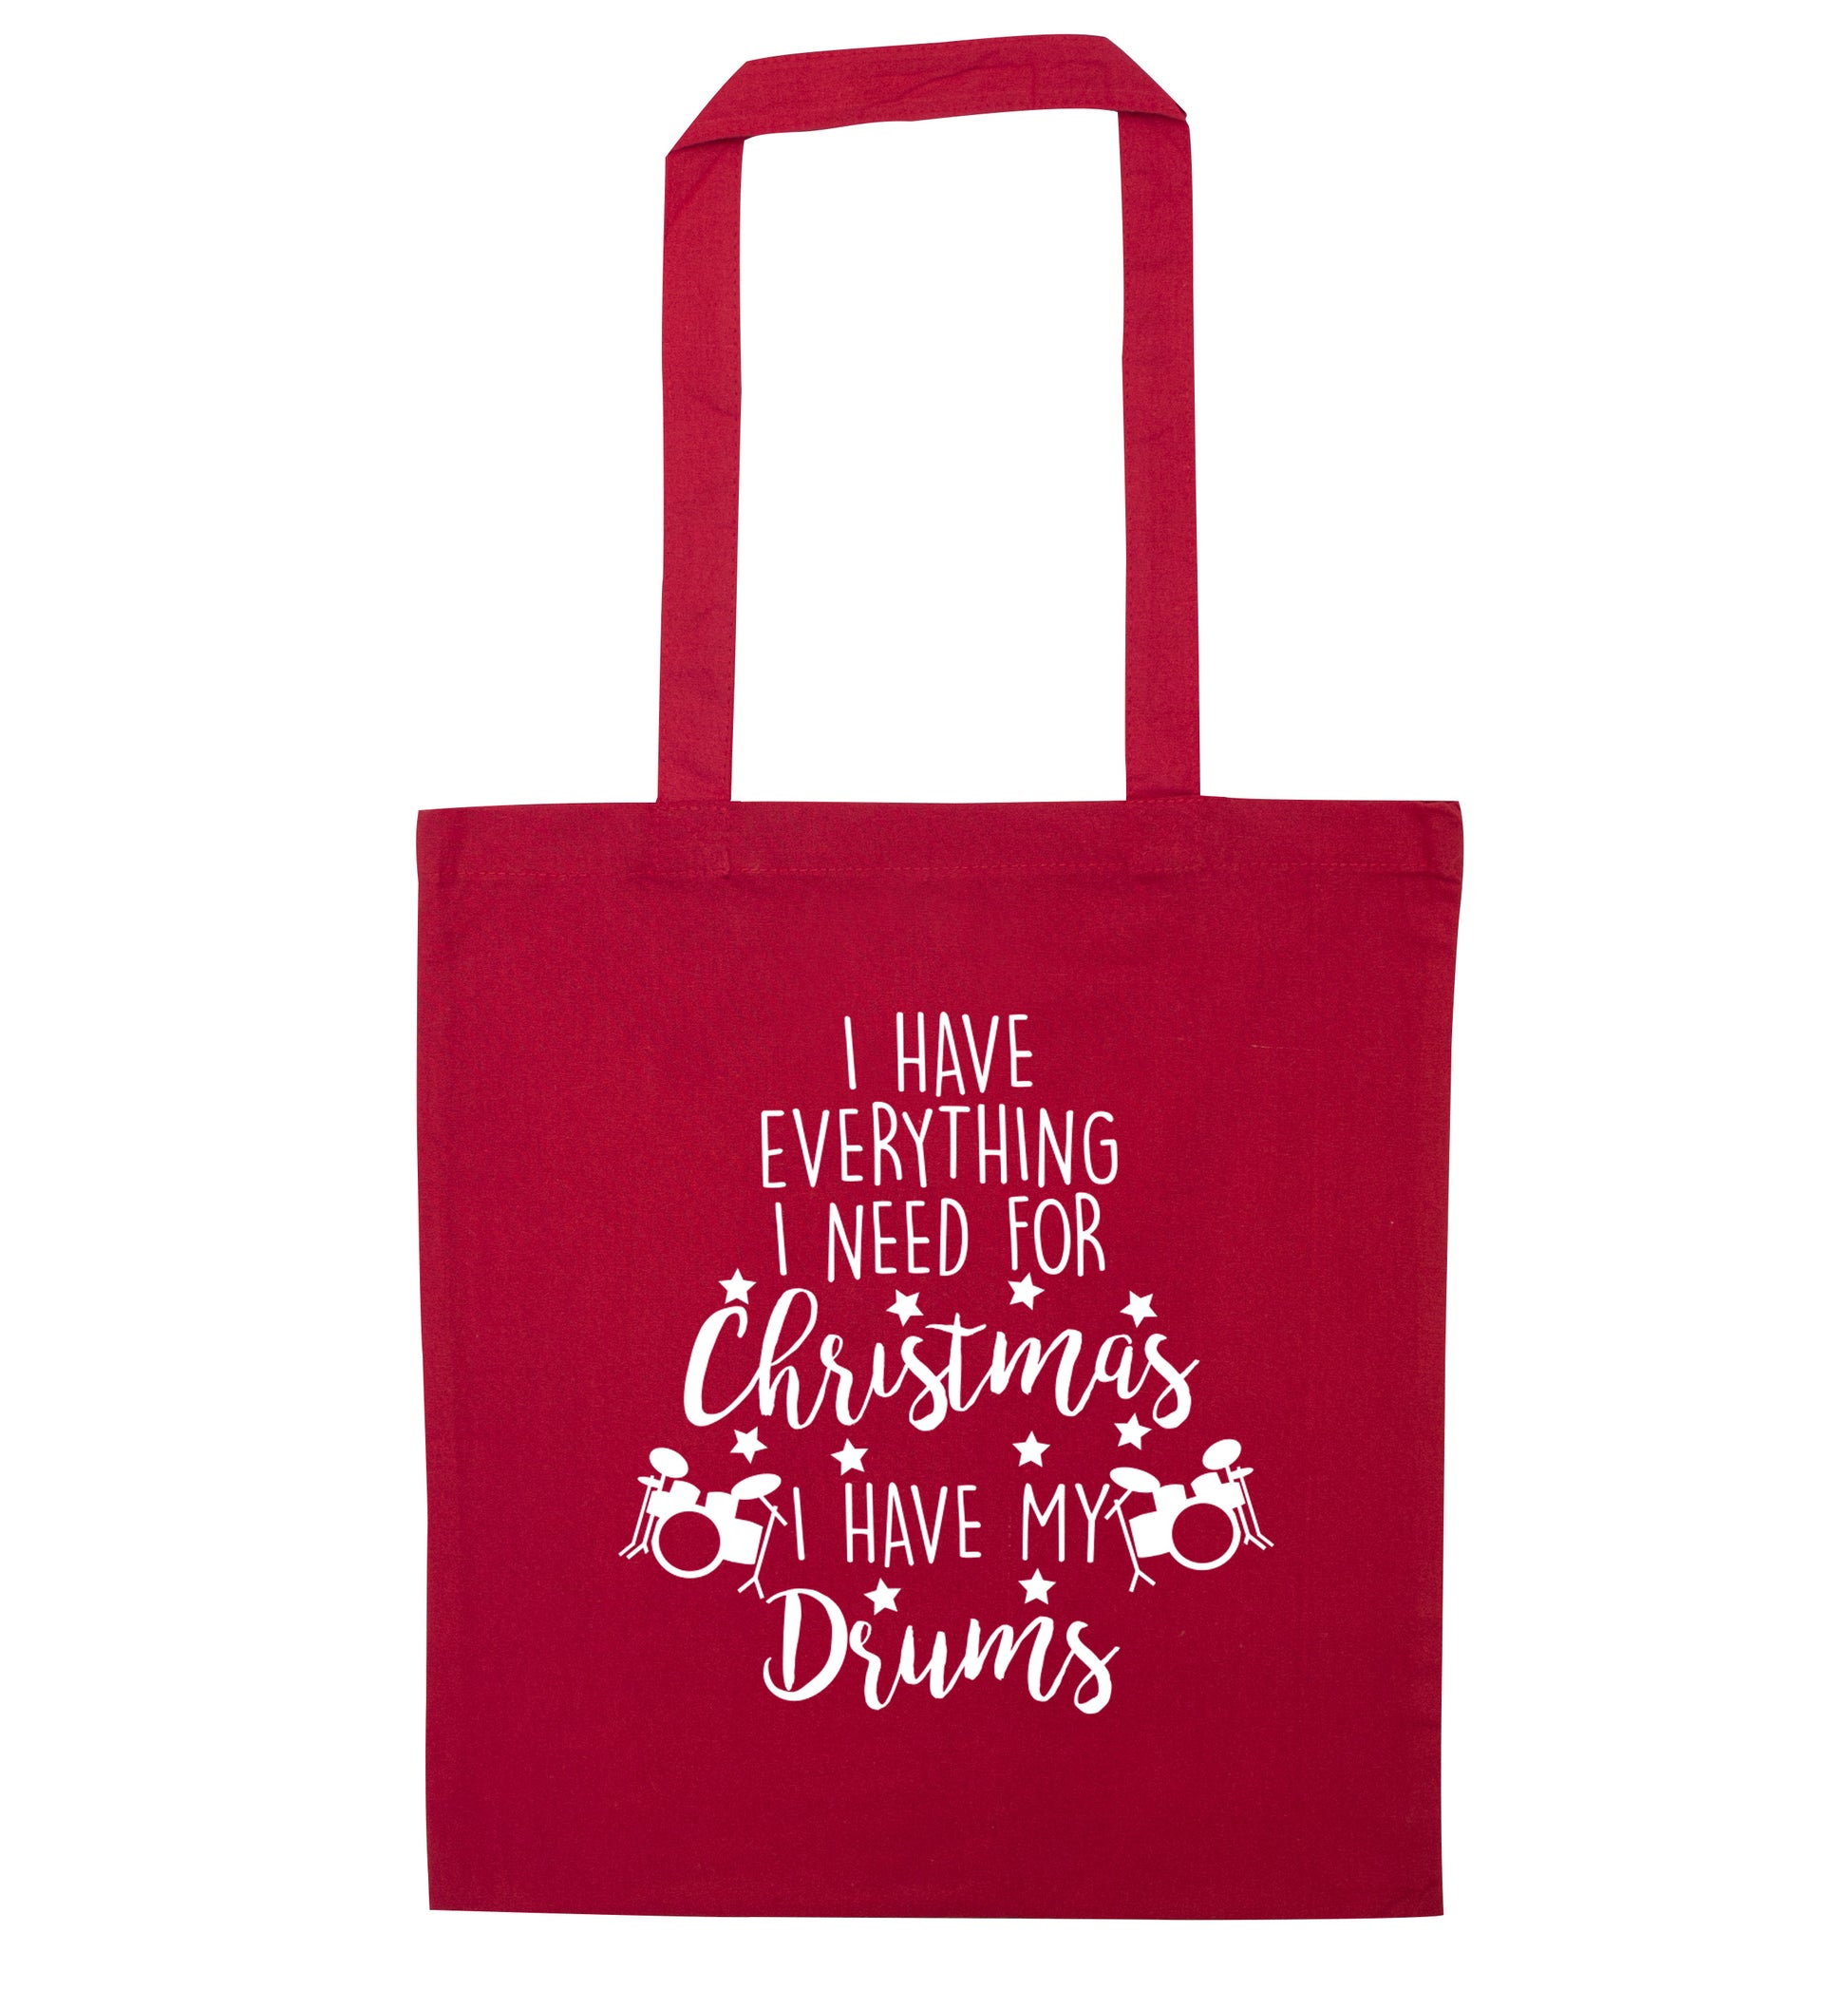 I have everything I need for Christmas I have my drums! red tote bag